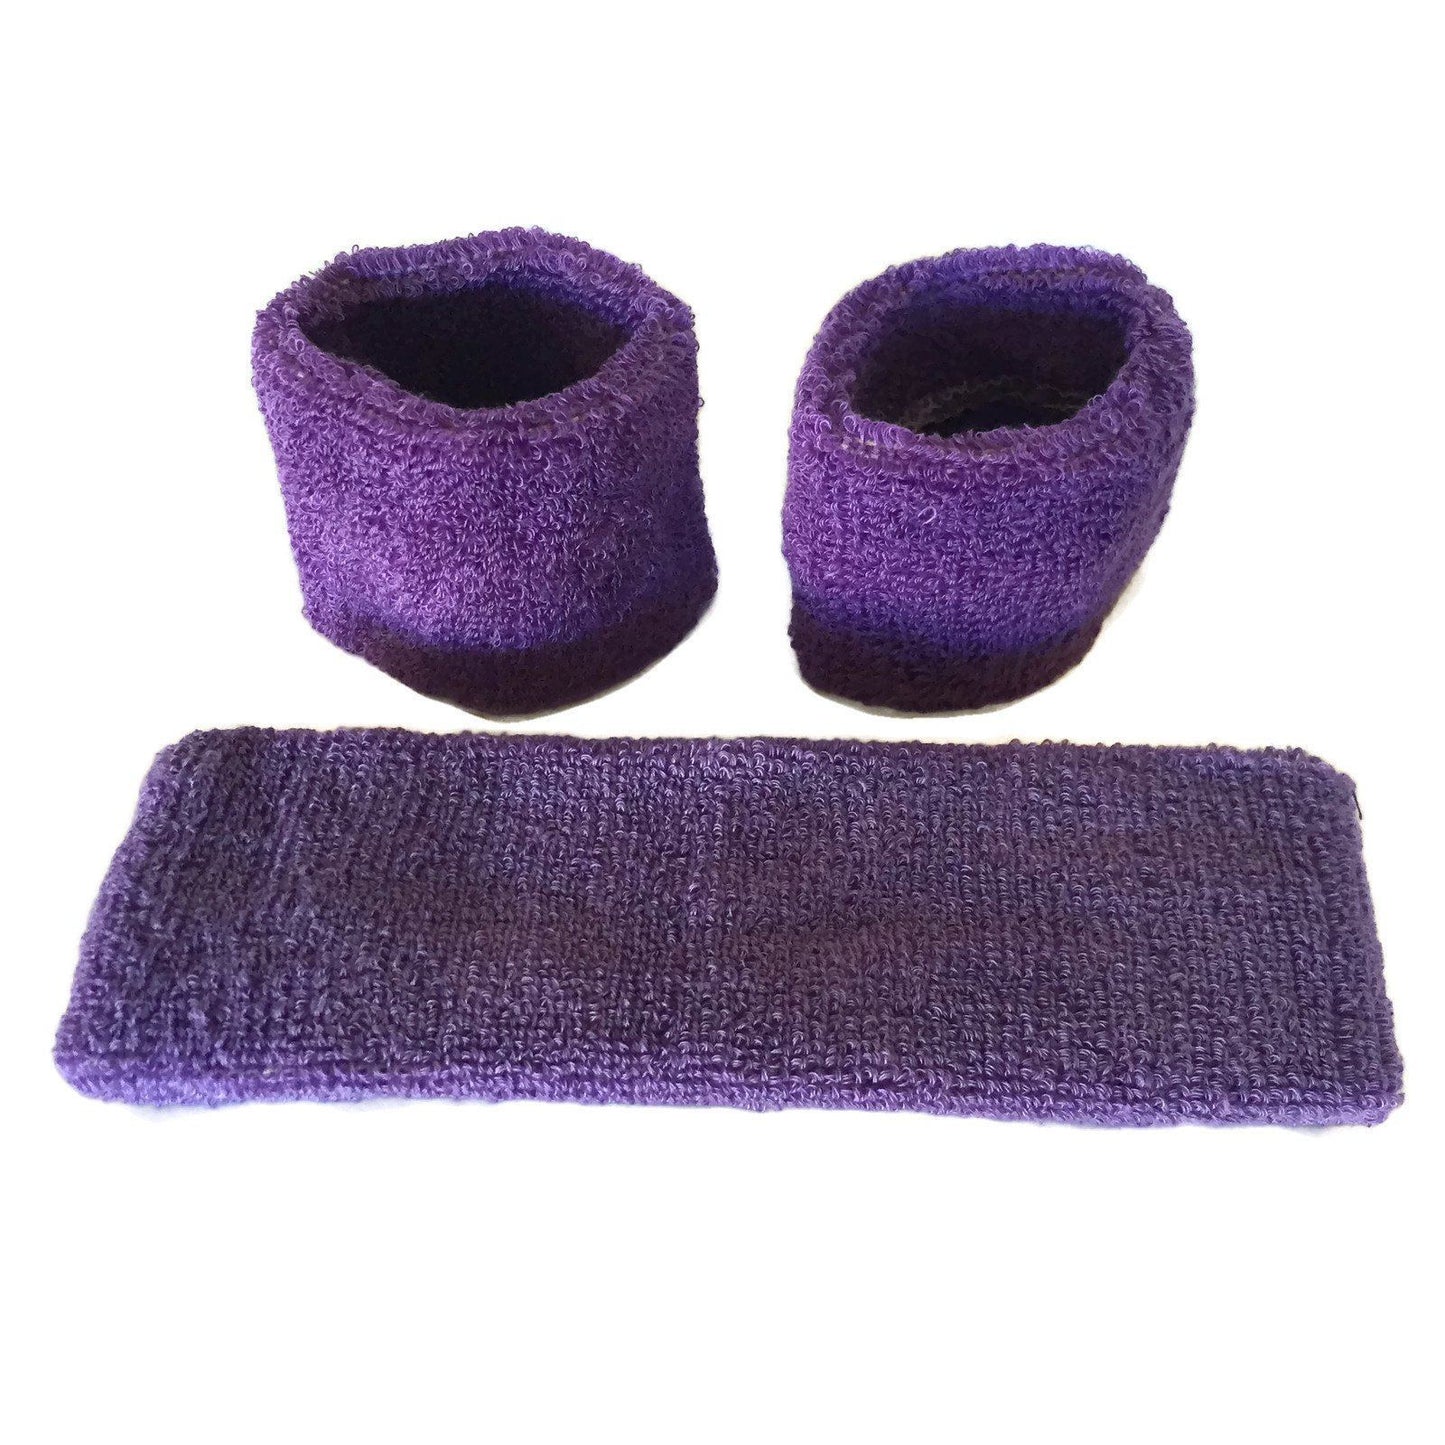 Purple Sweat Band Set (3pc) - Ponytails and Fairytales